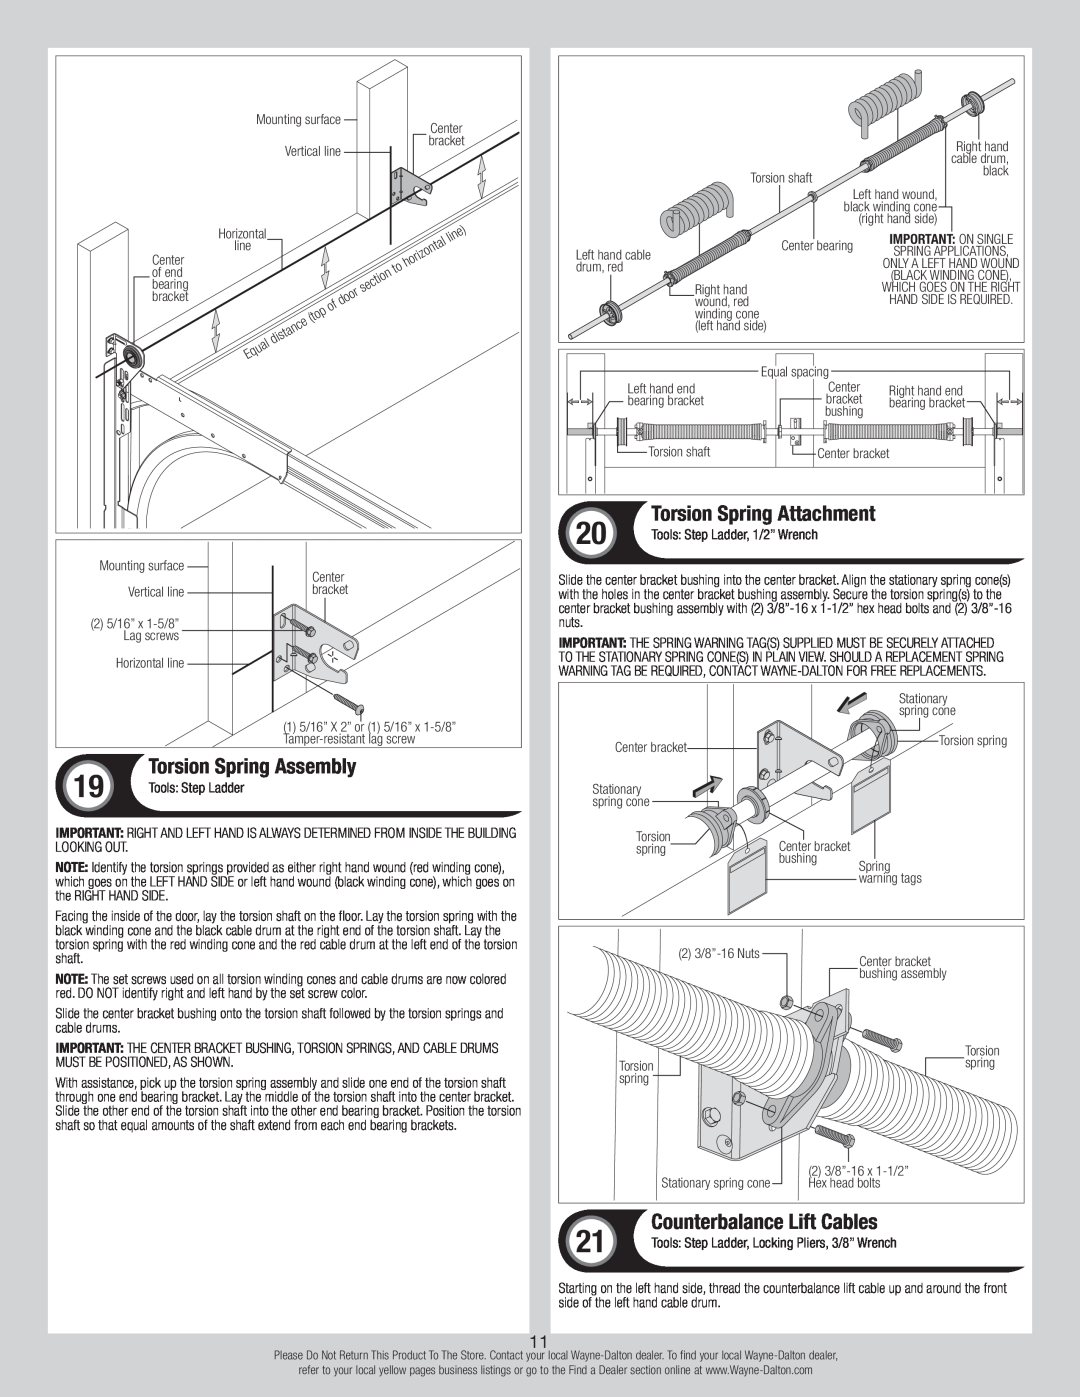 Wayne-Dalton 8700 installation instructions Counterbalance Lift Cables, Torsion Spring Assembly, Torsion Spring Attachment 